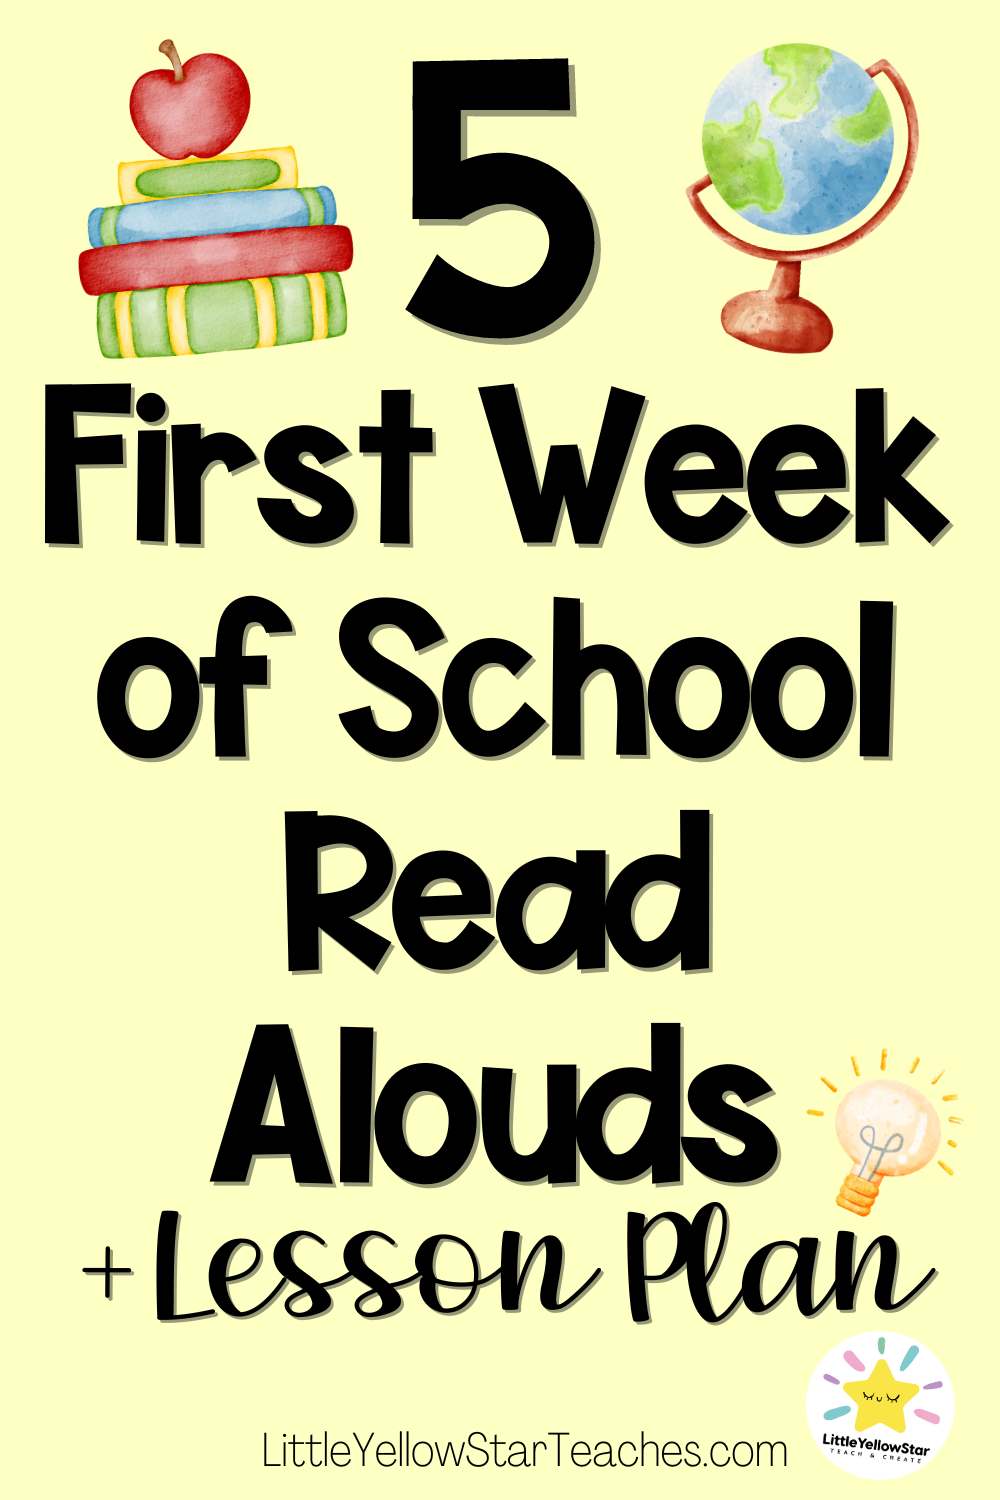 First Week of School Read Alouds with Free Lesson Plan